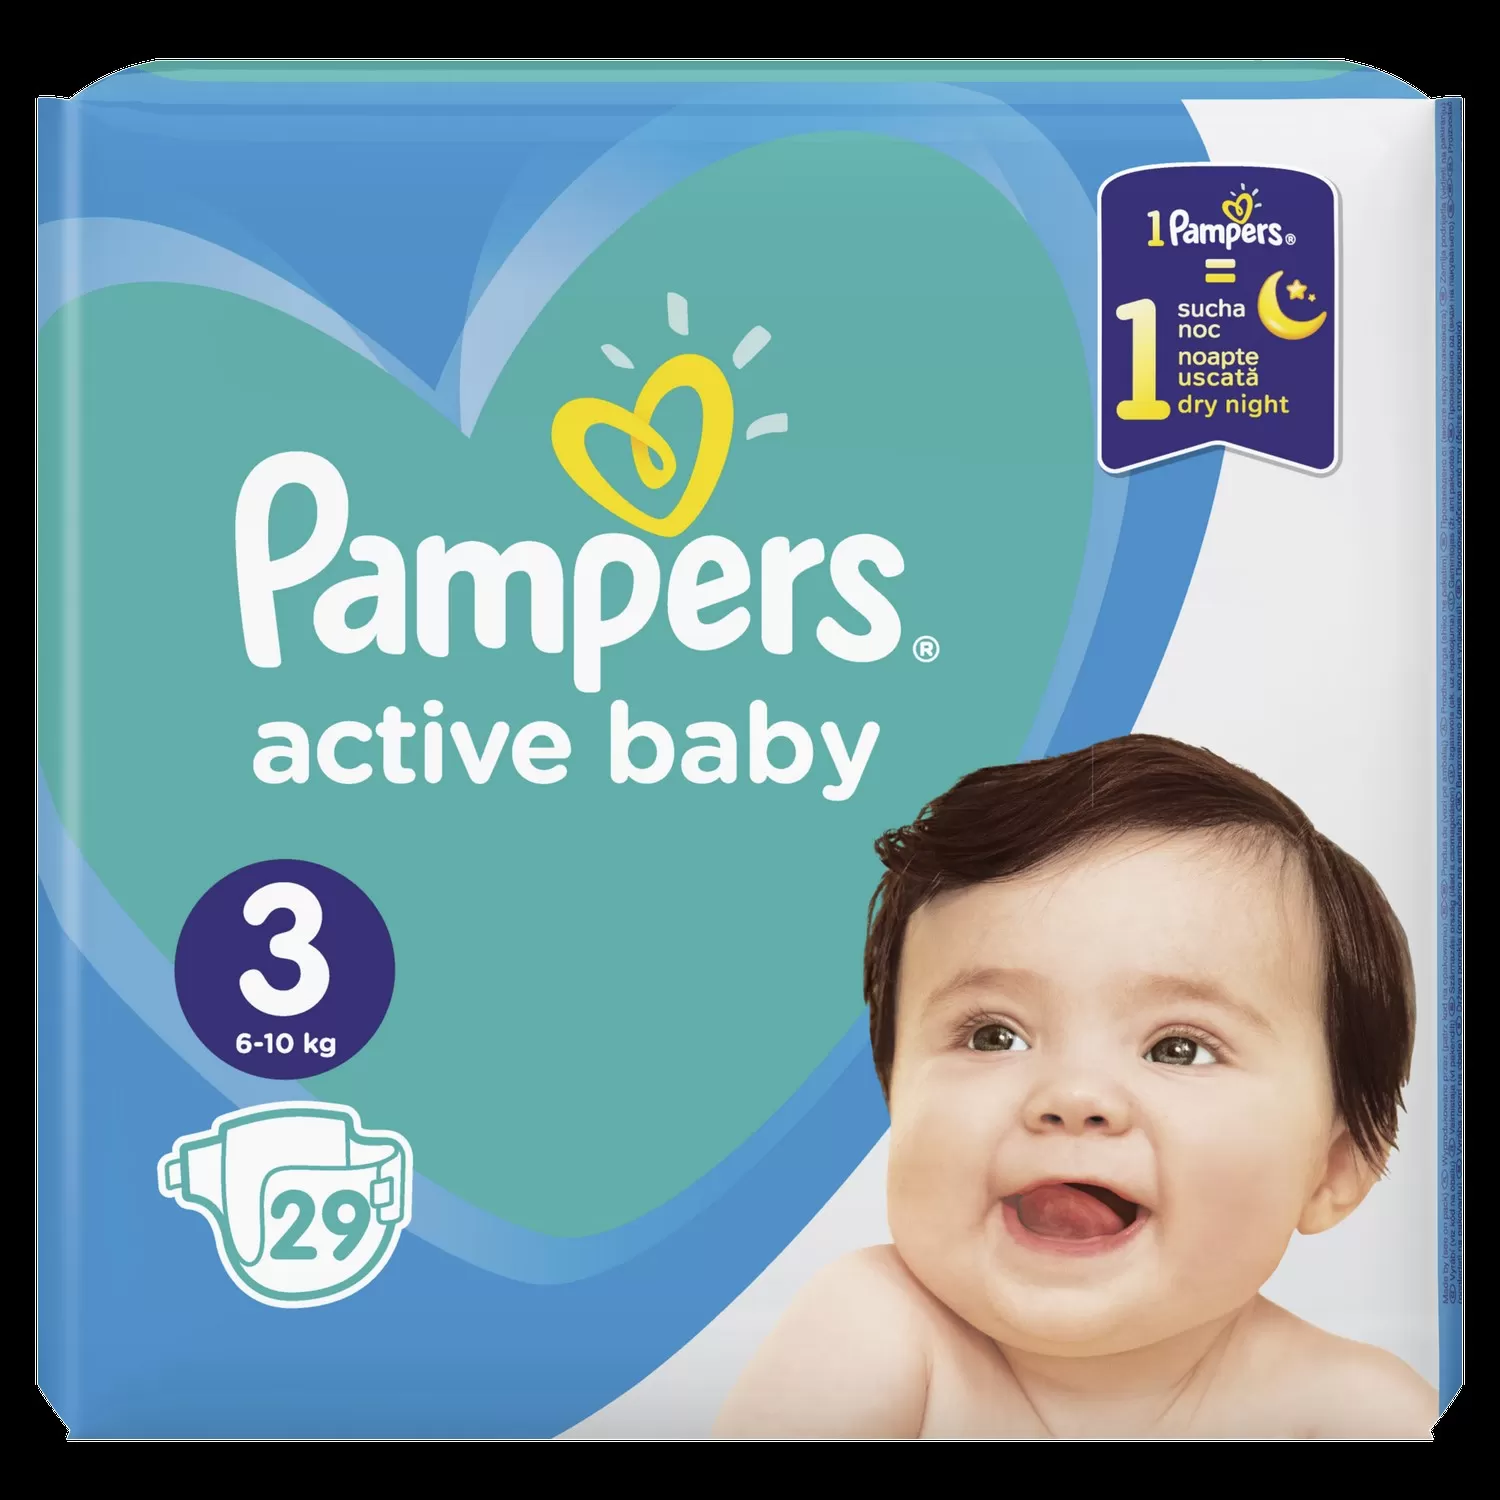 pampers pants 5 96